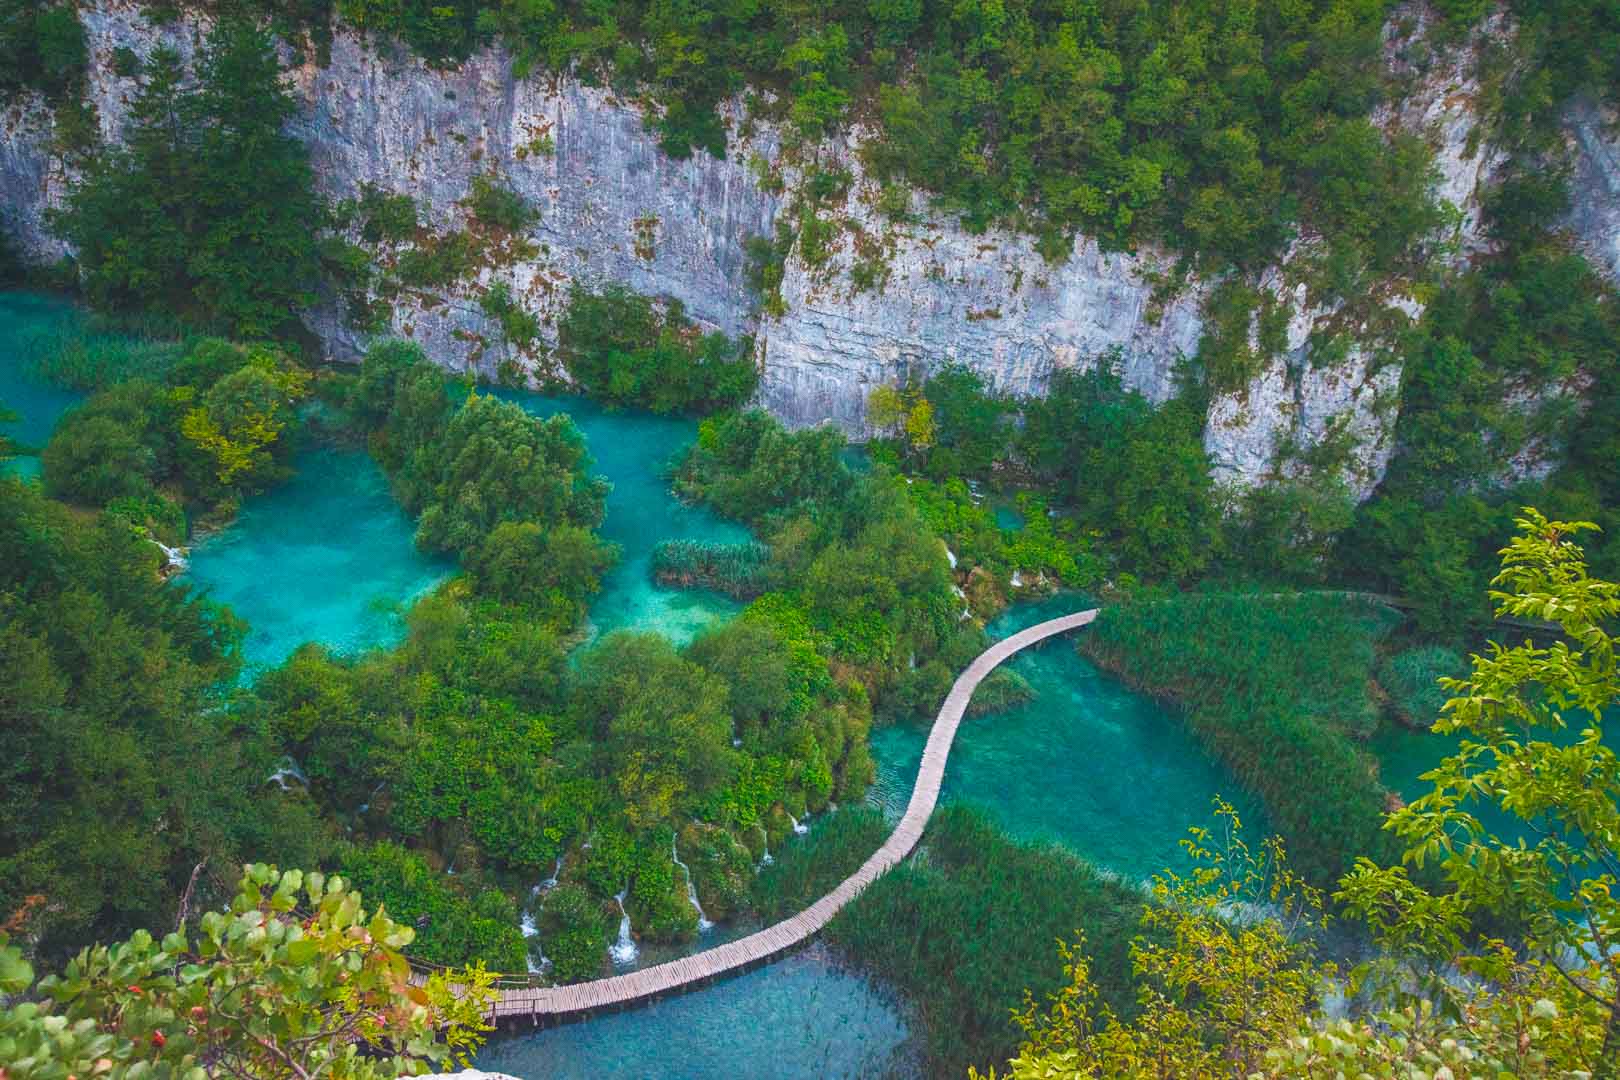 plitvice lakes national park from above